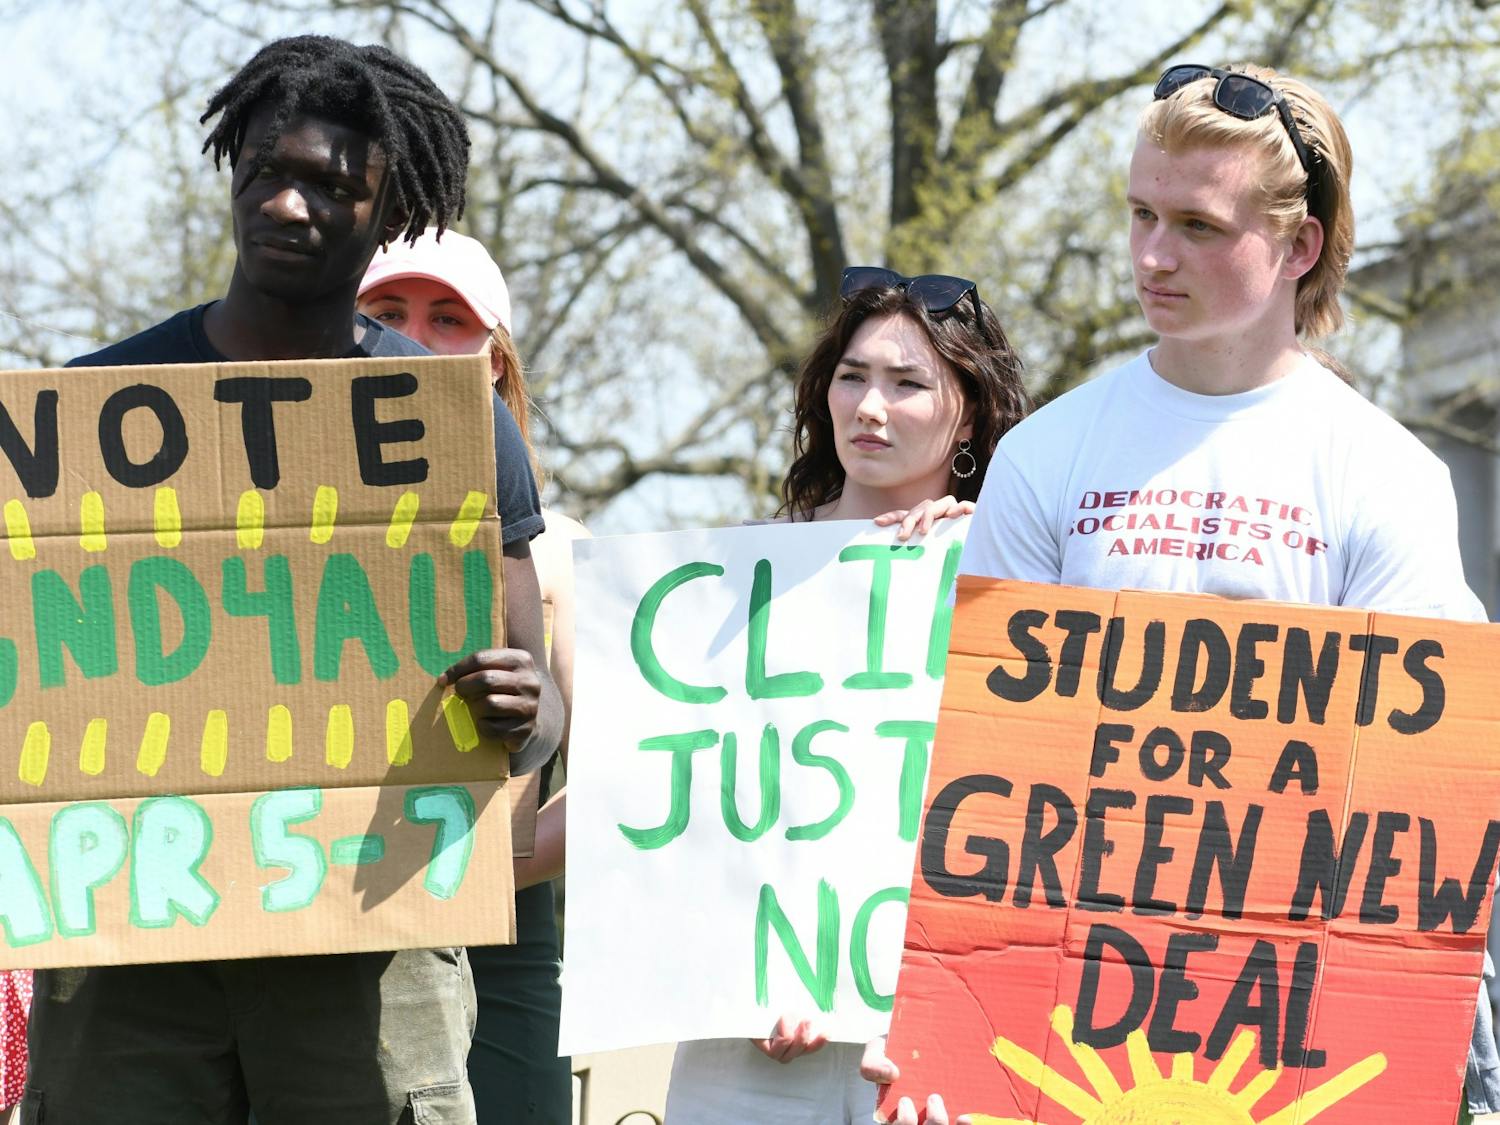 green new deal protest 4